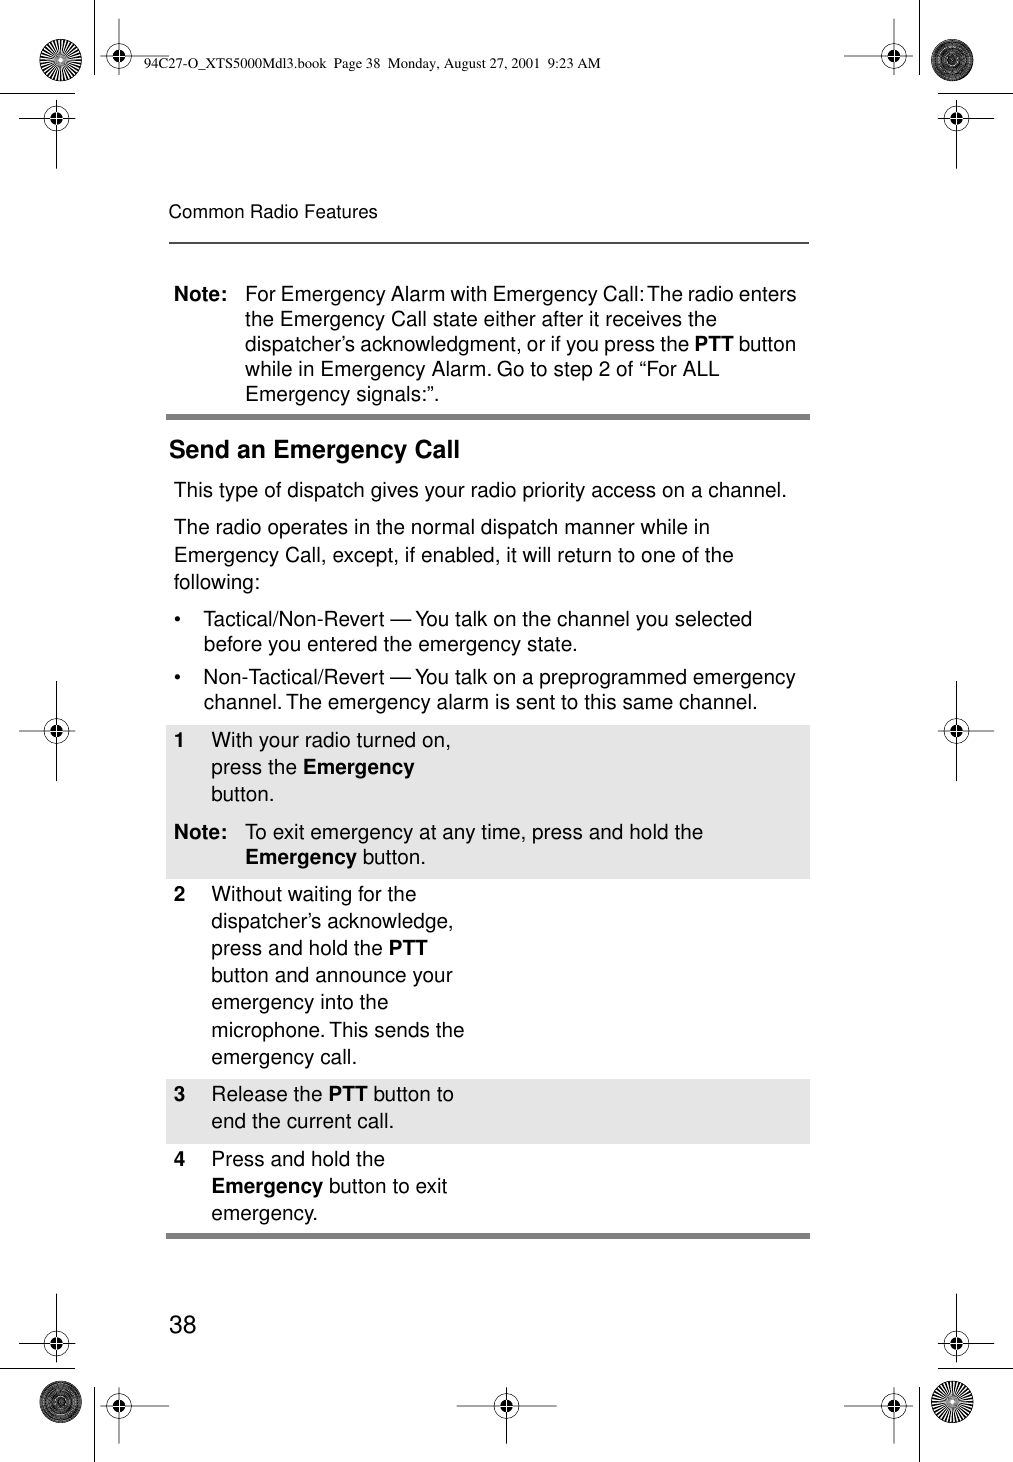 38Common Radio FeaturesSend an Emergency CallNote: For Emergency Alarm with Emergency Call: The radio enters the Emergency Call state either after it receives the dispatcher’s acknowledgment, or if you press the PTT button while in Emergency Alarm. Go to step 2 of “For ALL Emergency signals:”.This type of dispatch gives your radio priority access on a channel.The radio operates in the normal dispatch manner while in Emergency Call, except, if enabled, it will return to one of the following:• Tactical/Non-Revert — You talk on the channel you selected before you entered the emergency state.• Non-Tactical/Revert — You talk on a preprogrammed emergency channel. The emergency alarm is sent to this same channel.1With your radio turned on, press the Emergency button.Note: To exit emergency at any time, press and hold the Emergency button.2Without waiting for the dispatcher’s acknowledge, press and hold the PTT button and announce your emergency into the microphone. This sends the emergency call.3Release the PTT button to end the current call. 4Press and hold the Emergency button to exit emergency. 94C27-O_XTS5000Mdl3.book  Page 38  Monday, August 27, 2001  9:23 AM